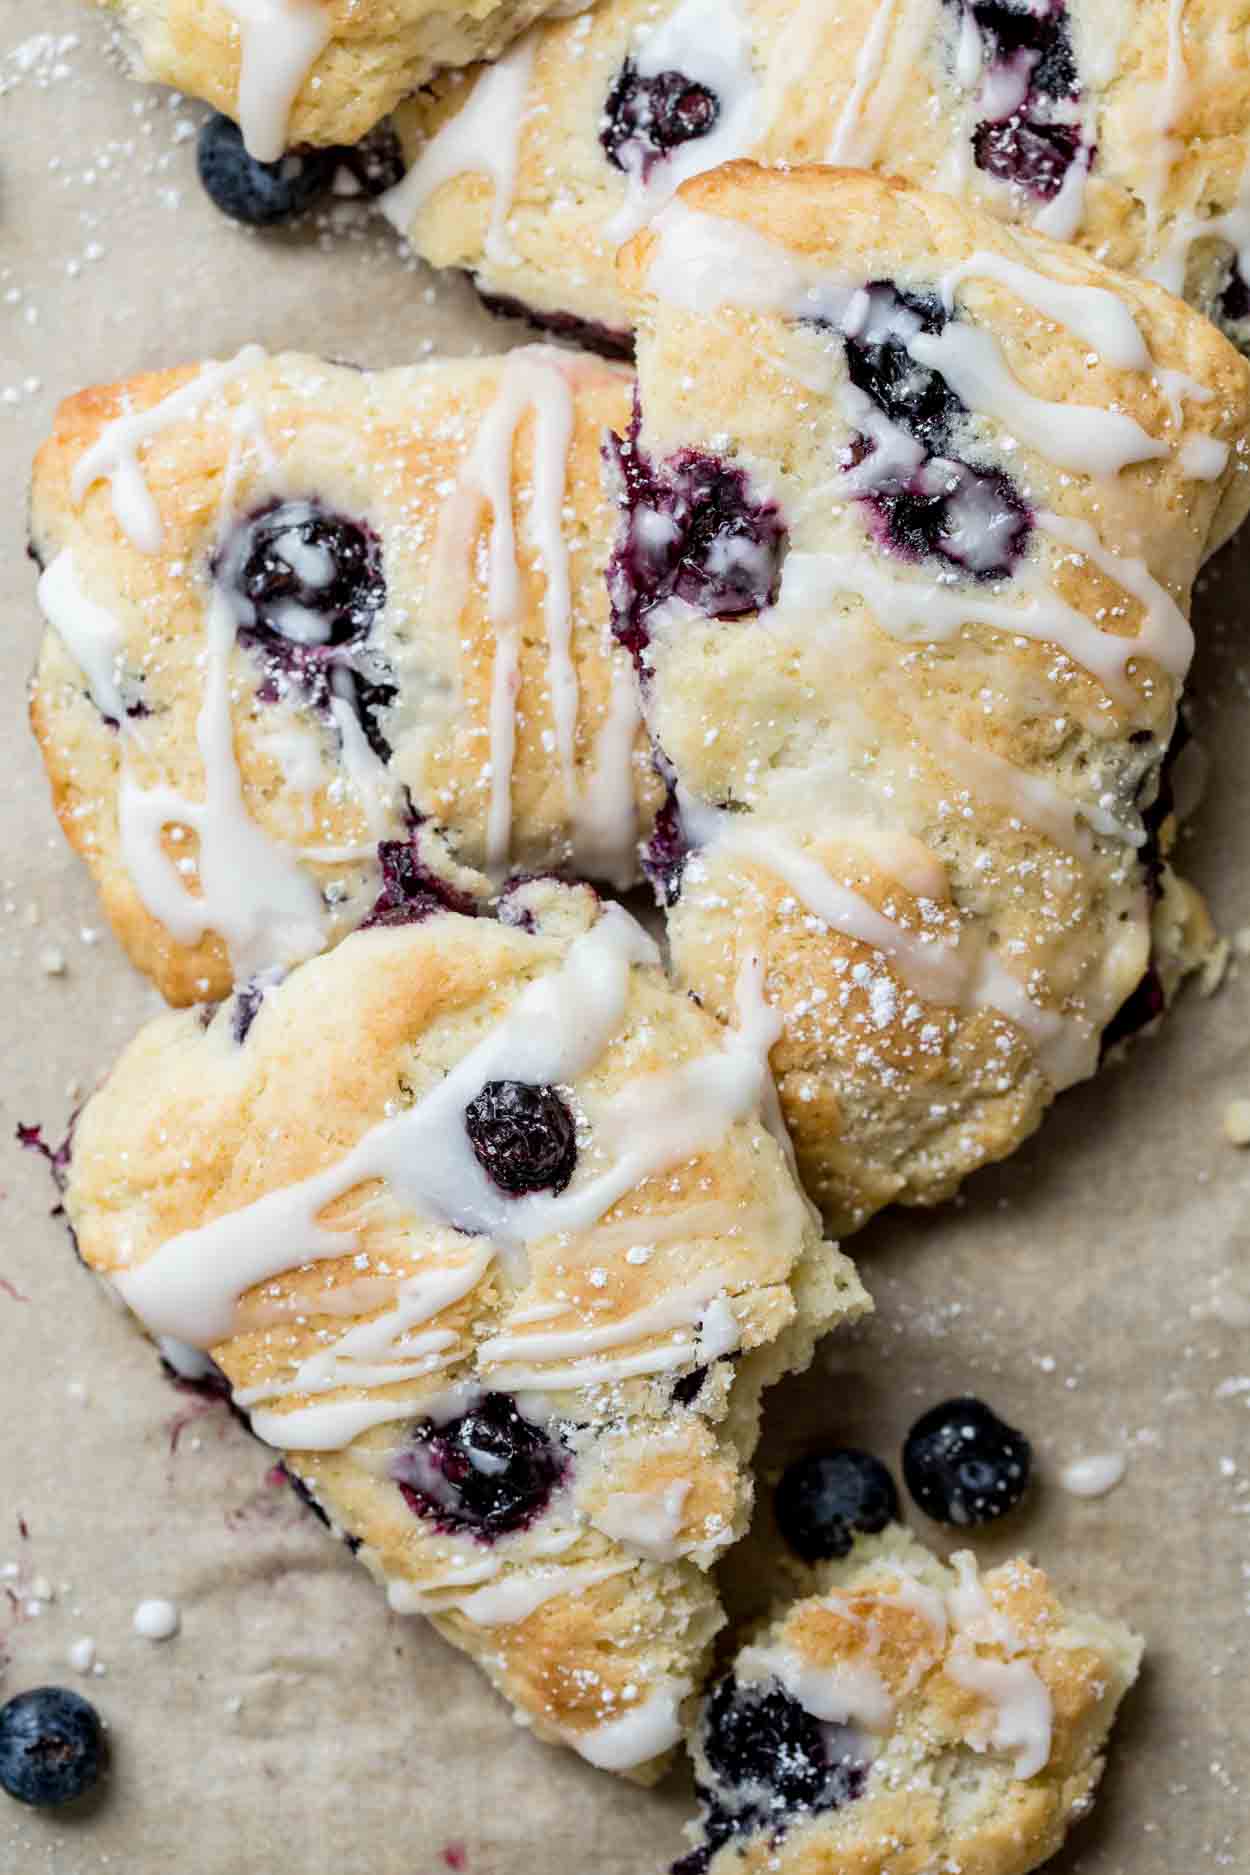 Three scones laid on top of each other, drizzled in glaze.